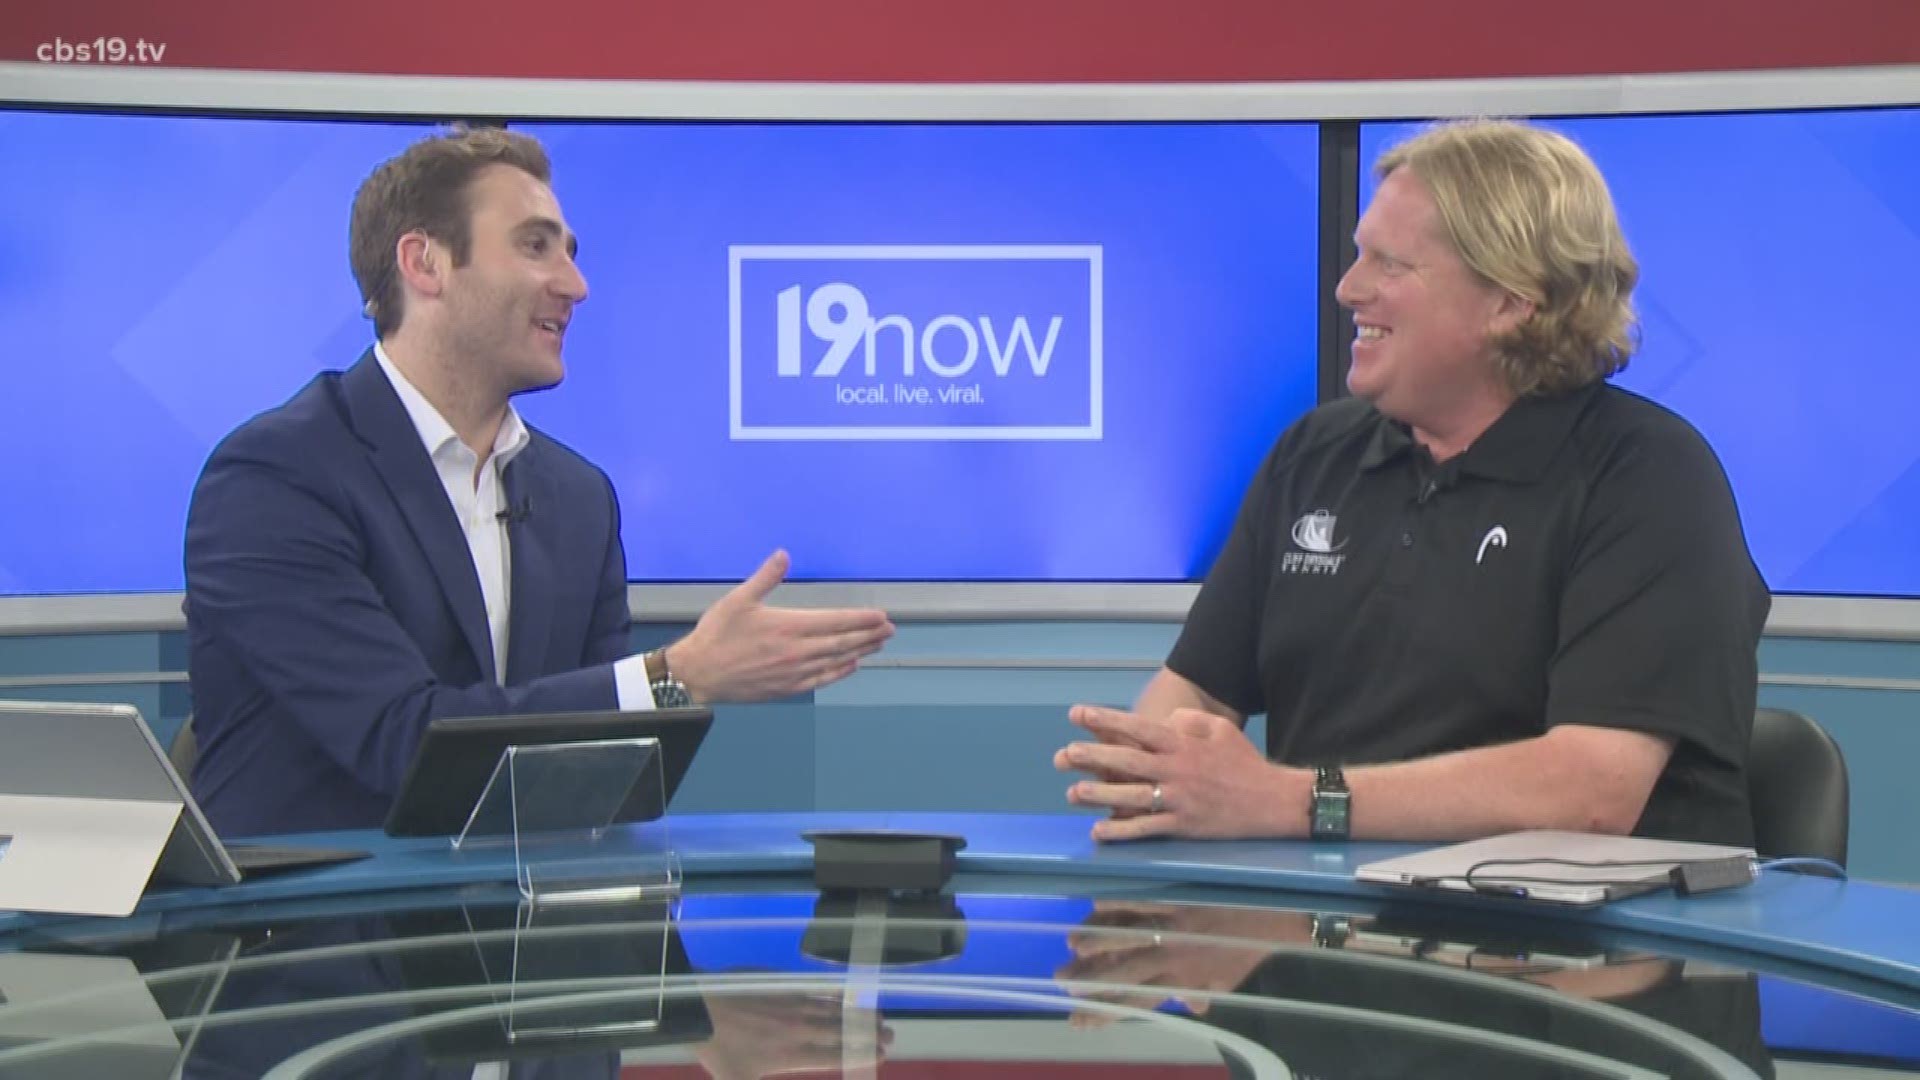 Matthew Coerver, the Director of Tennis at Tyler Athletic and Swim Club, joins 19now to discuss the ACEing Autism program.